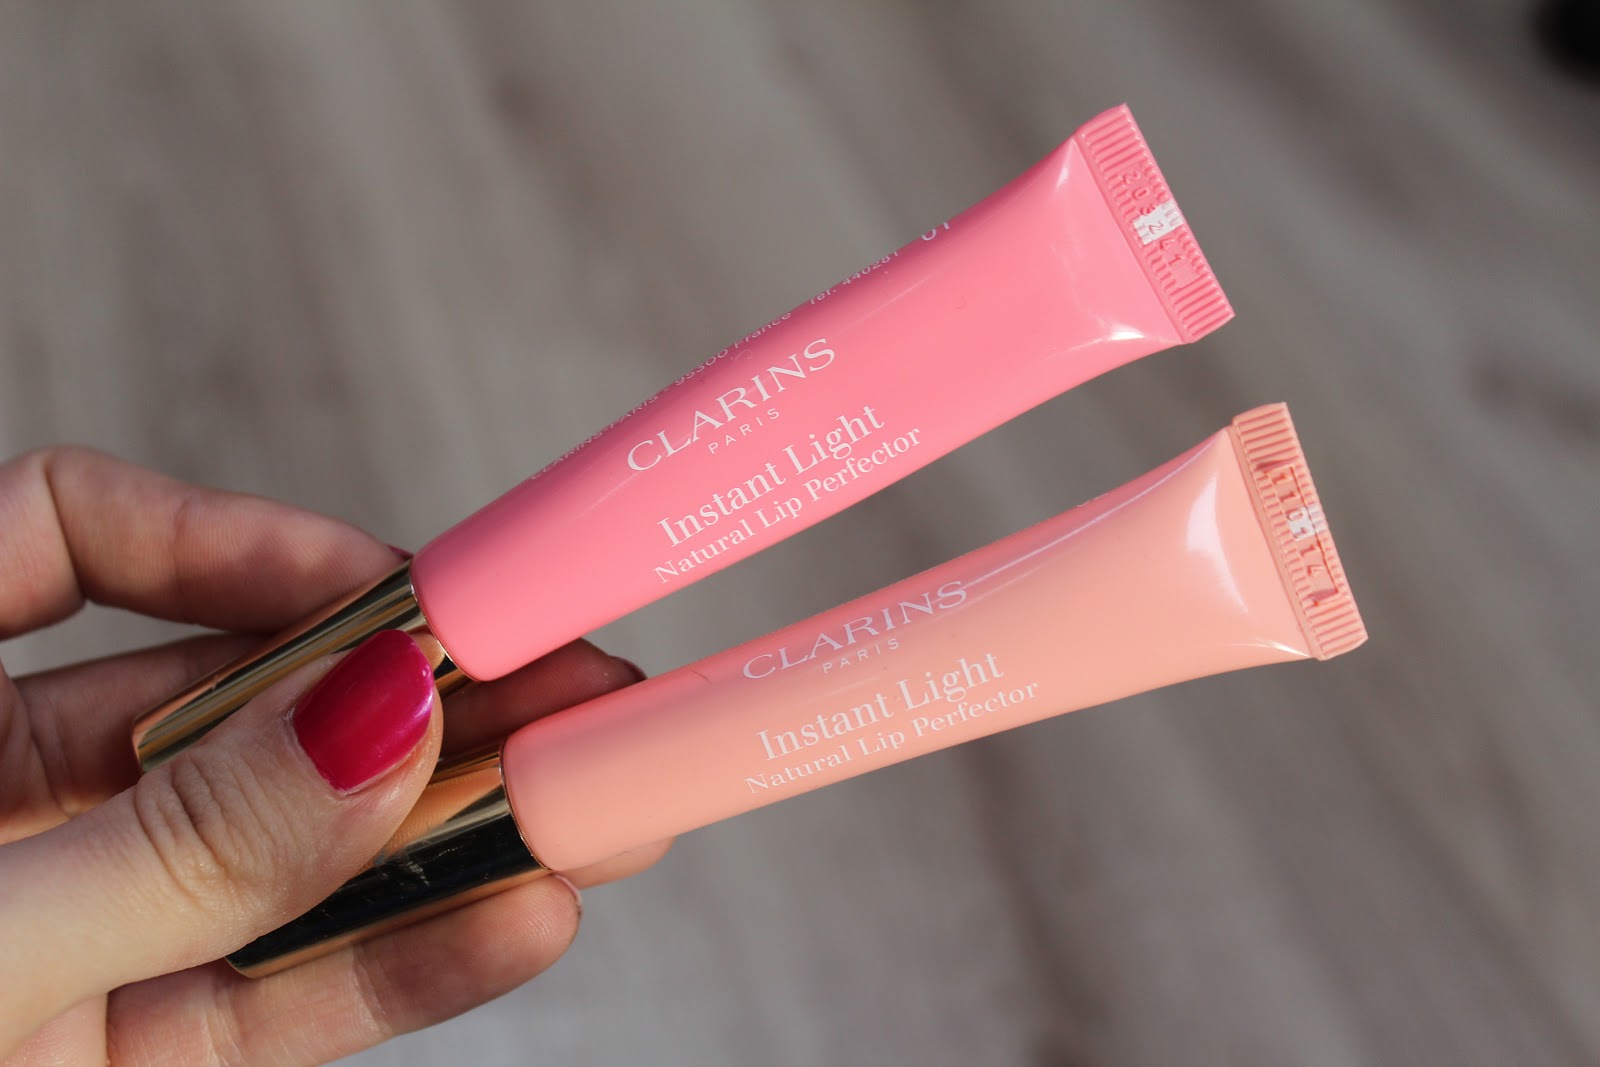 Clarins Instant Light Natural Lip Perfector Lily Pebbles